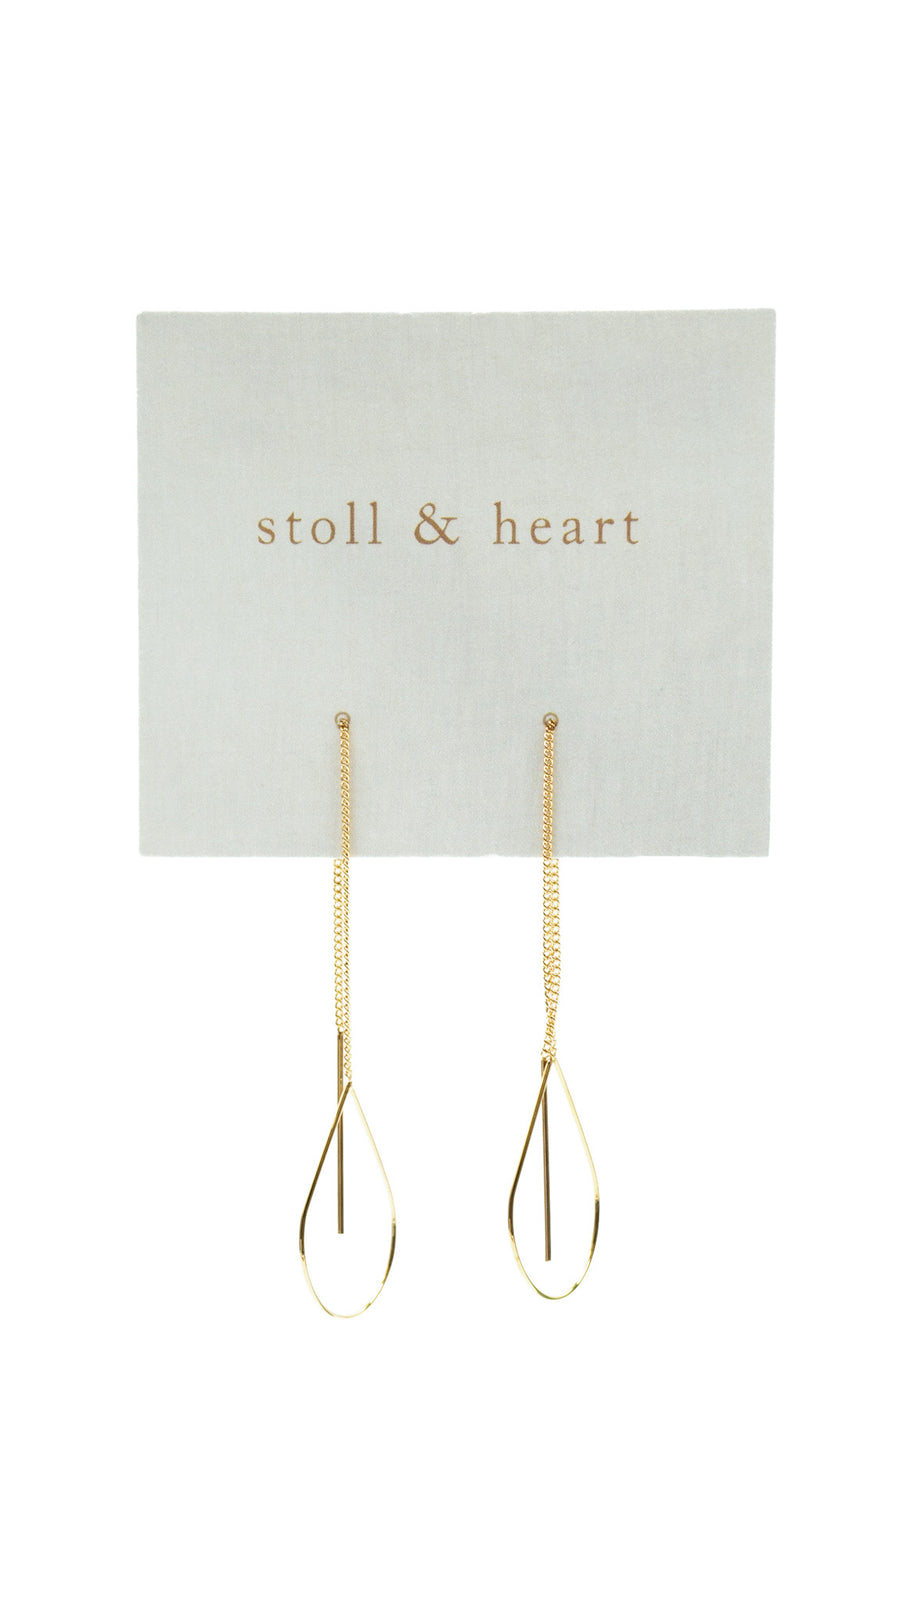 The Gold Threaders by Stoll & Heart